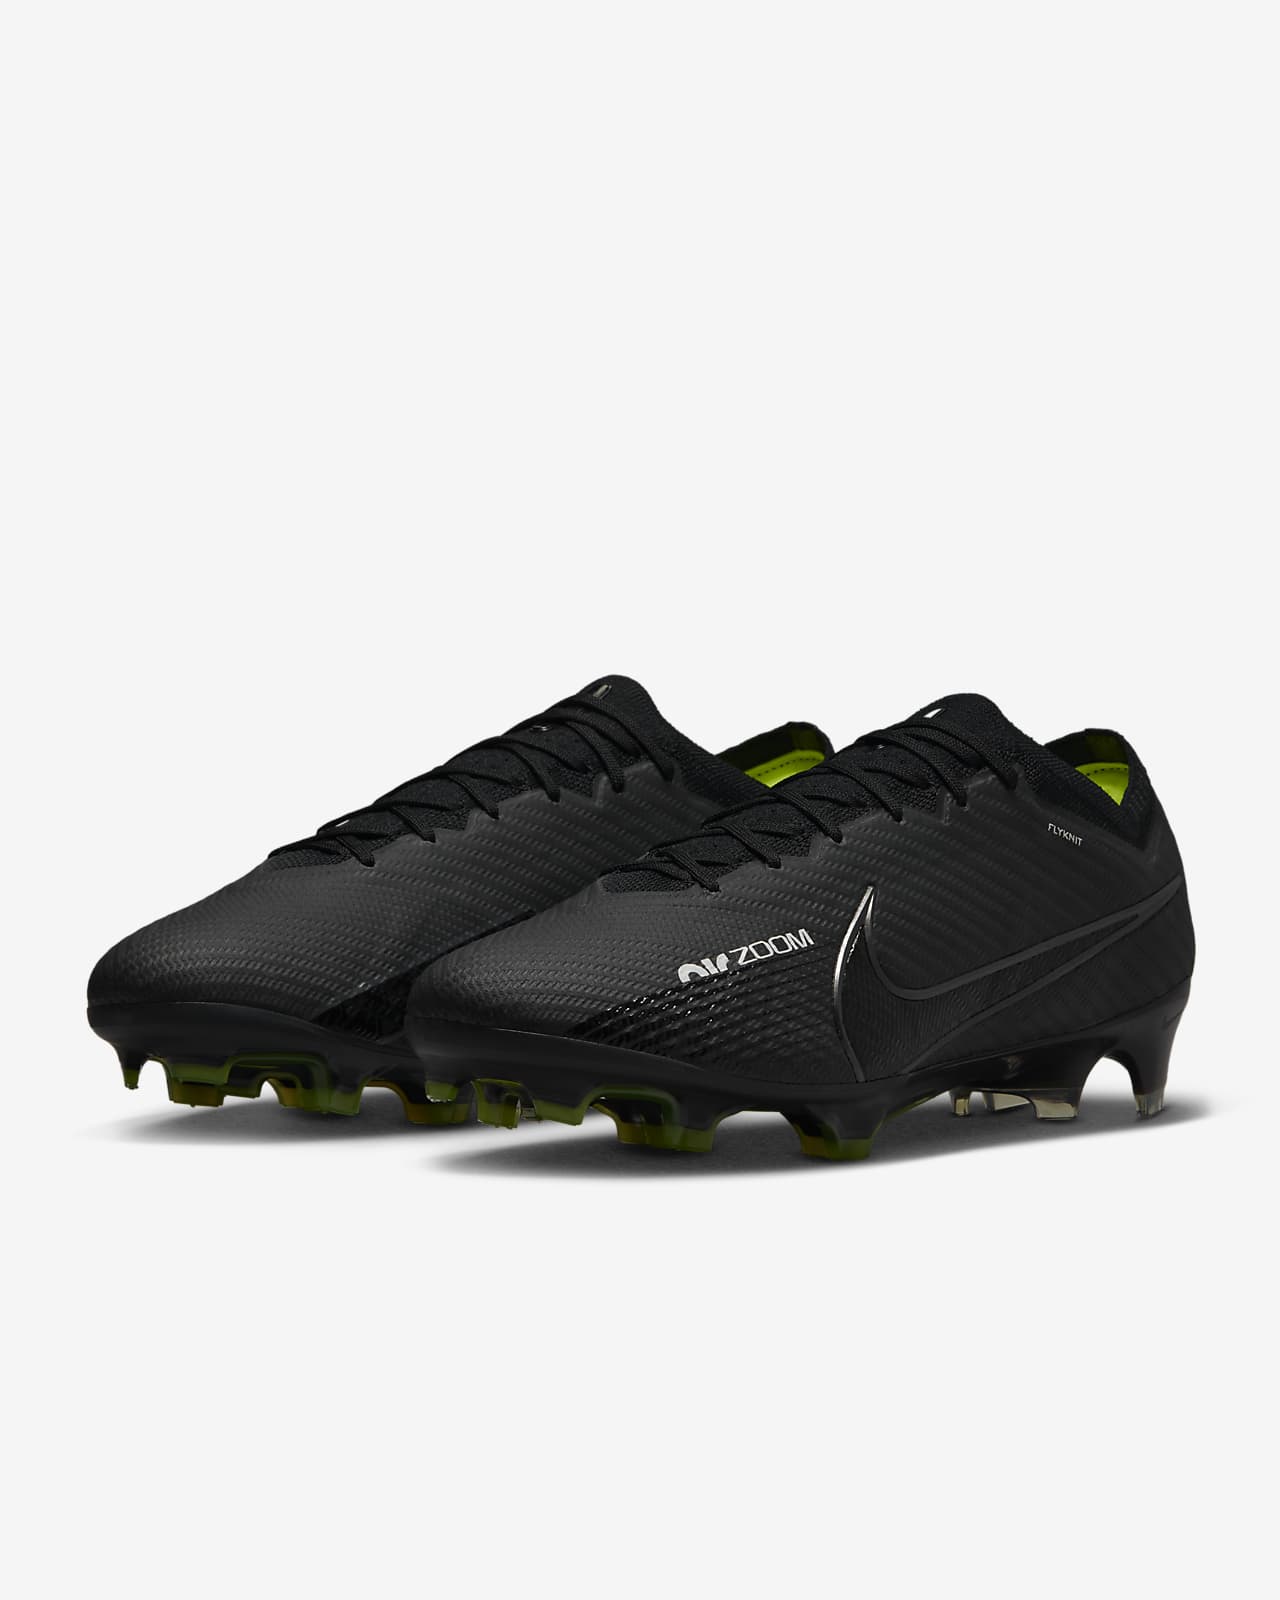 Nike Zoom Mercurial Vapor 15 Elite FG Firm Ground Soccer Cleats | lupon